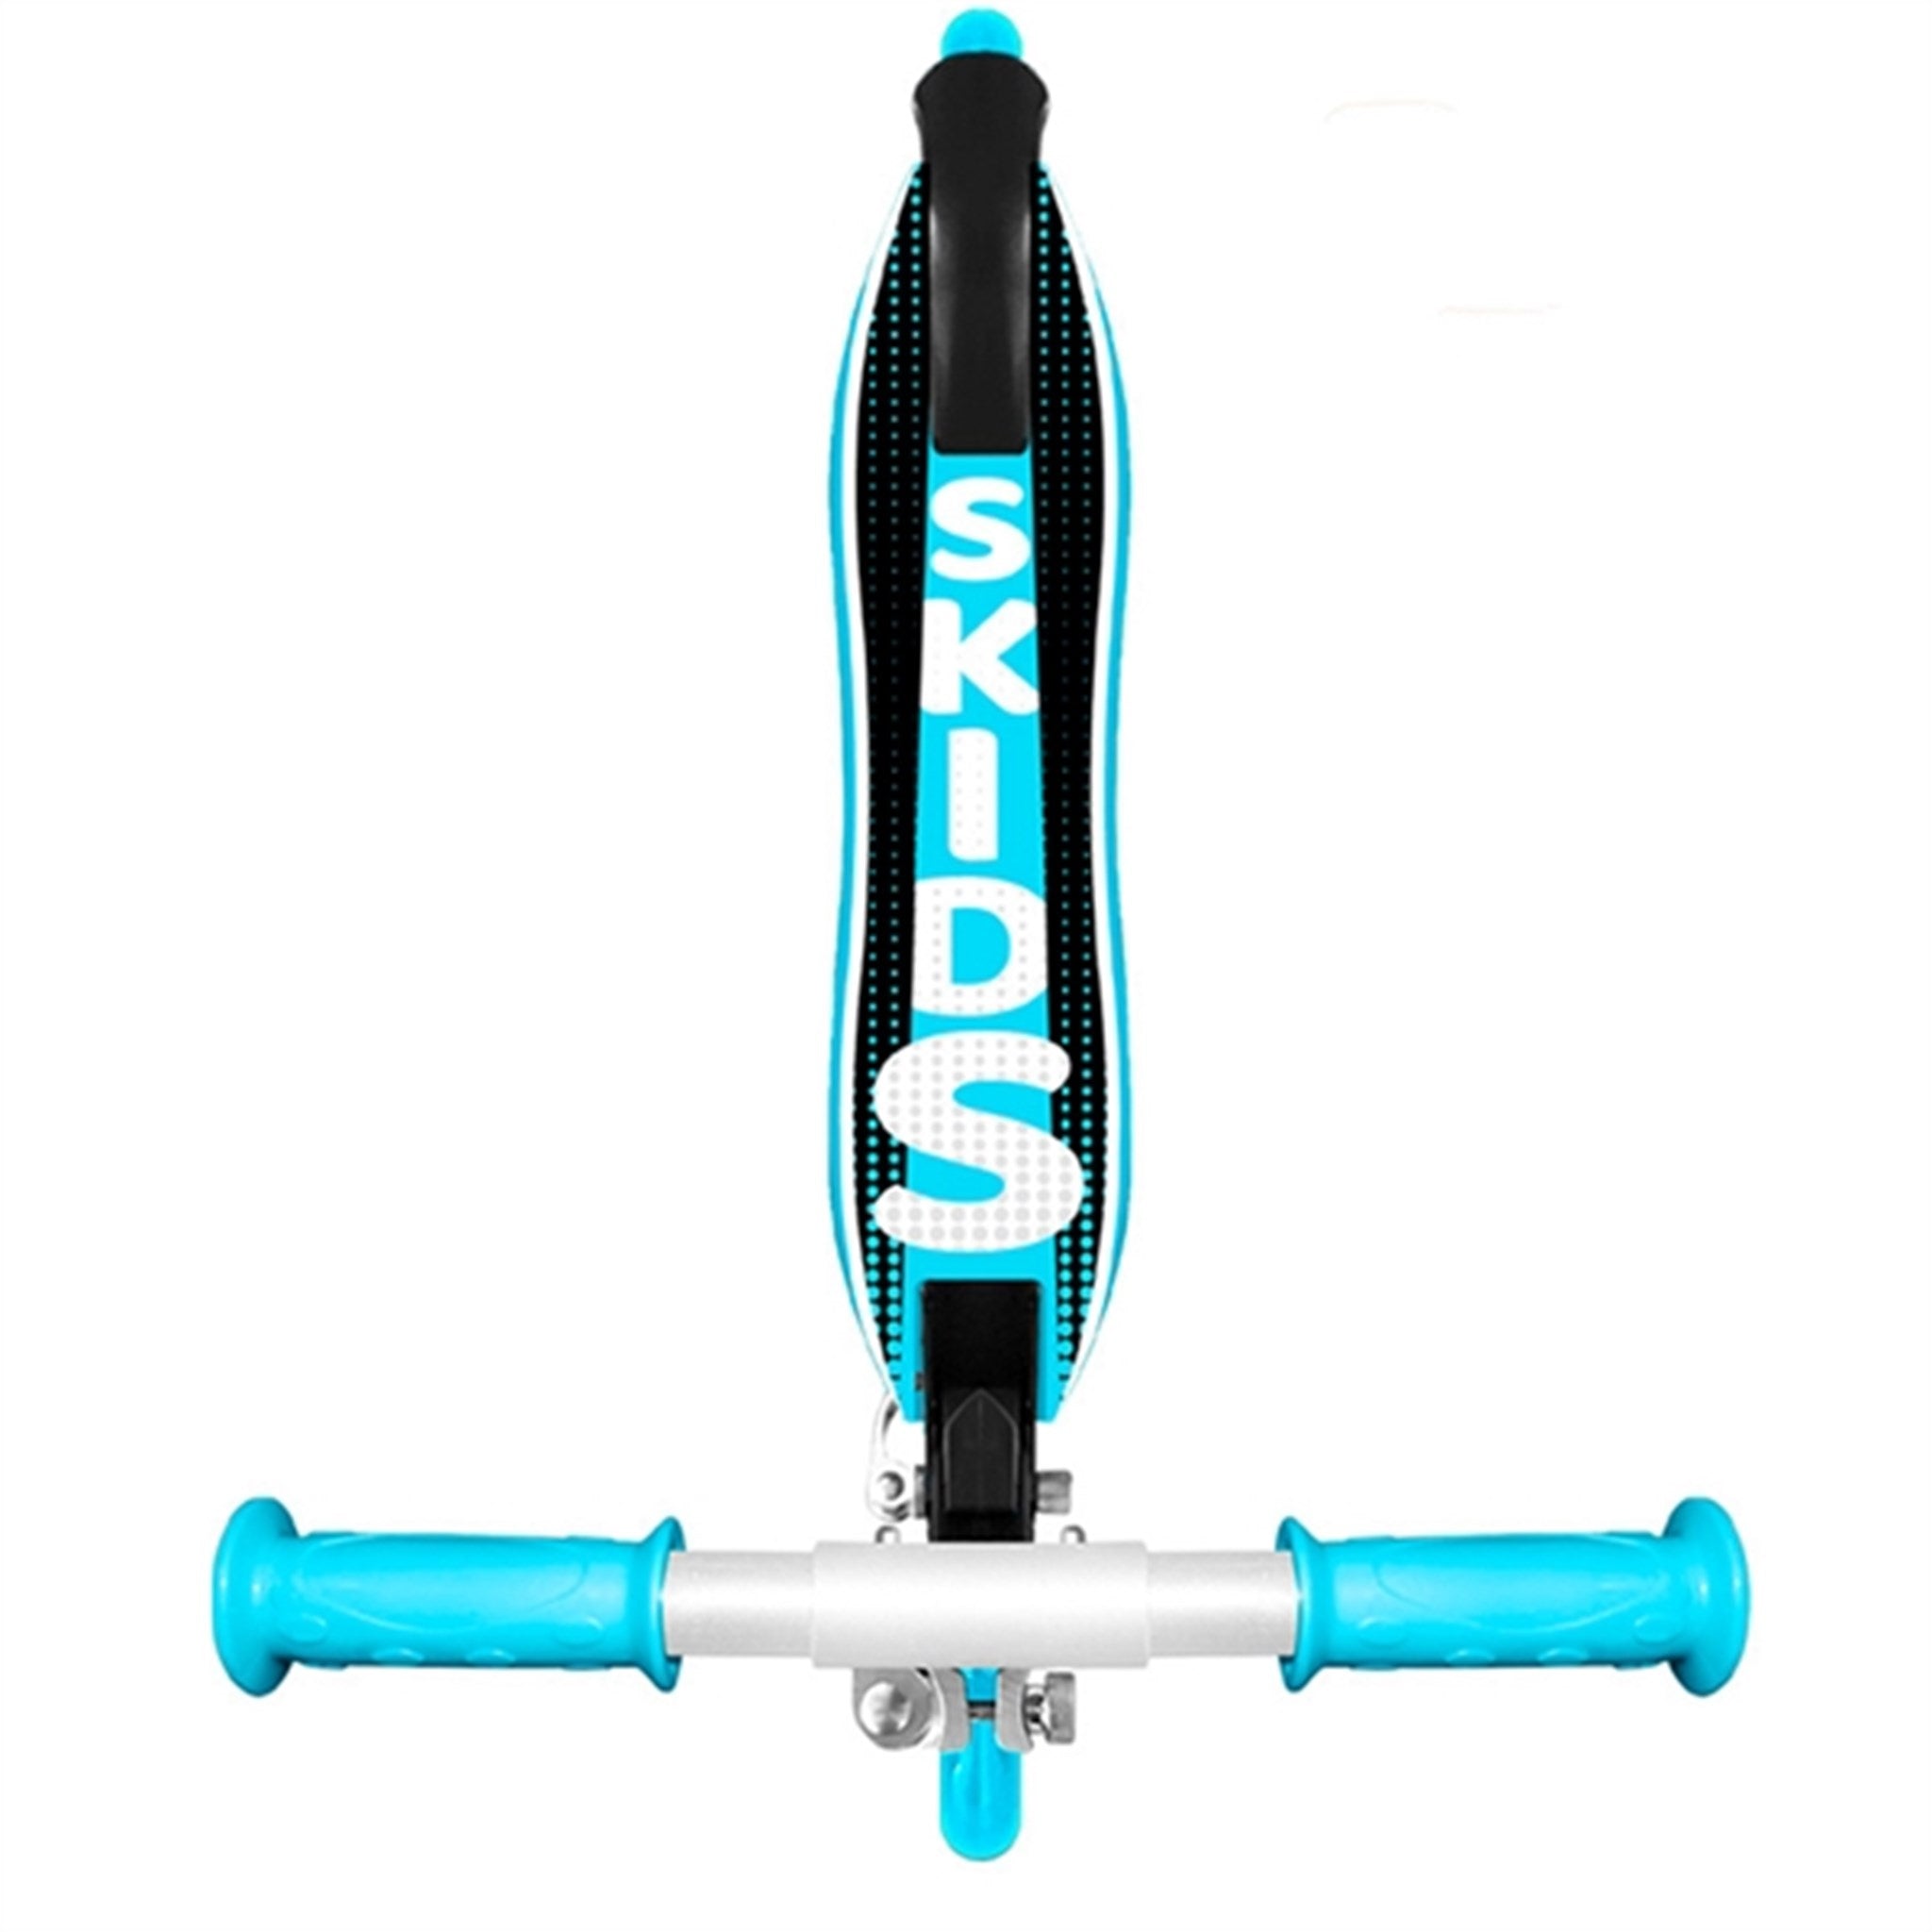 Skids Control Foldable Scooter Blue 2